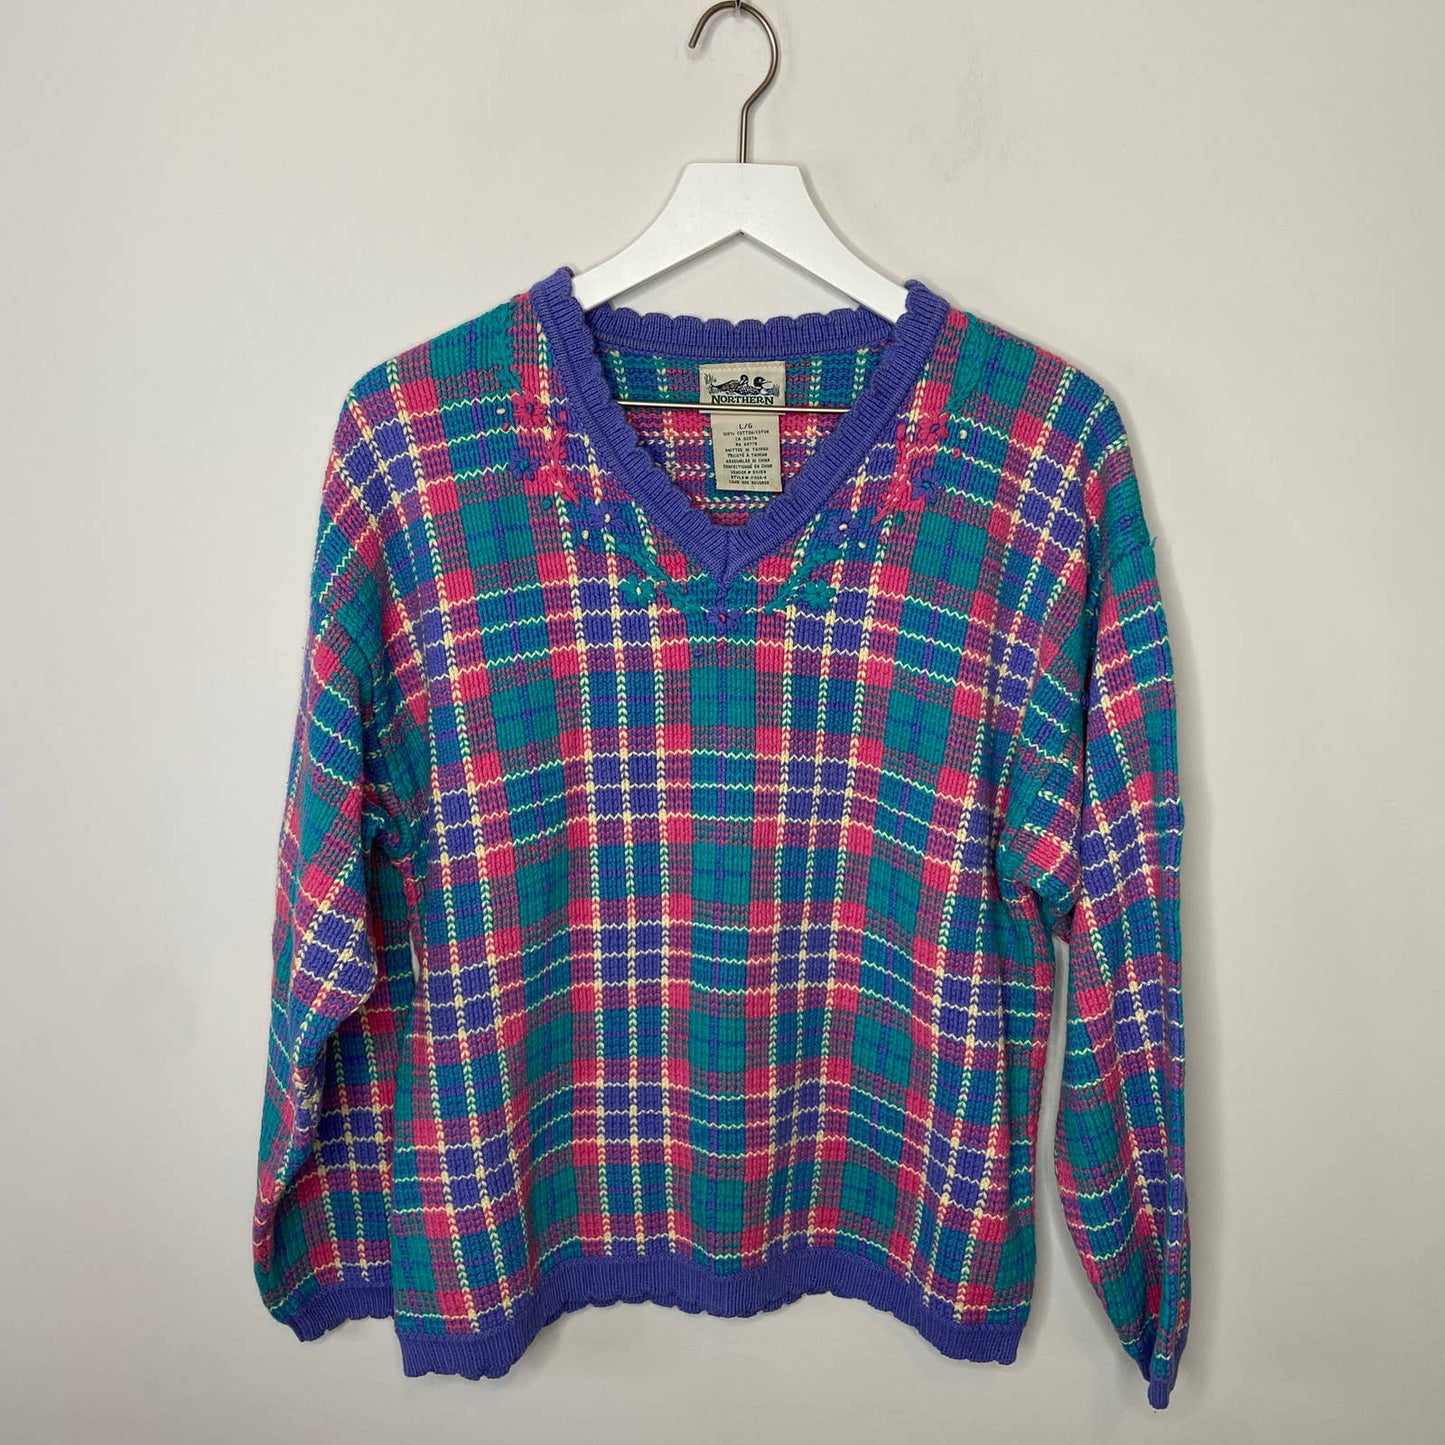 Vintage Northern Reflections Bright Plaid V Neck Sweater - Women's Size L